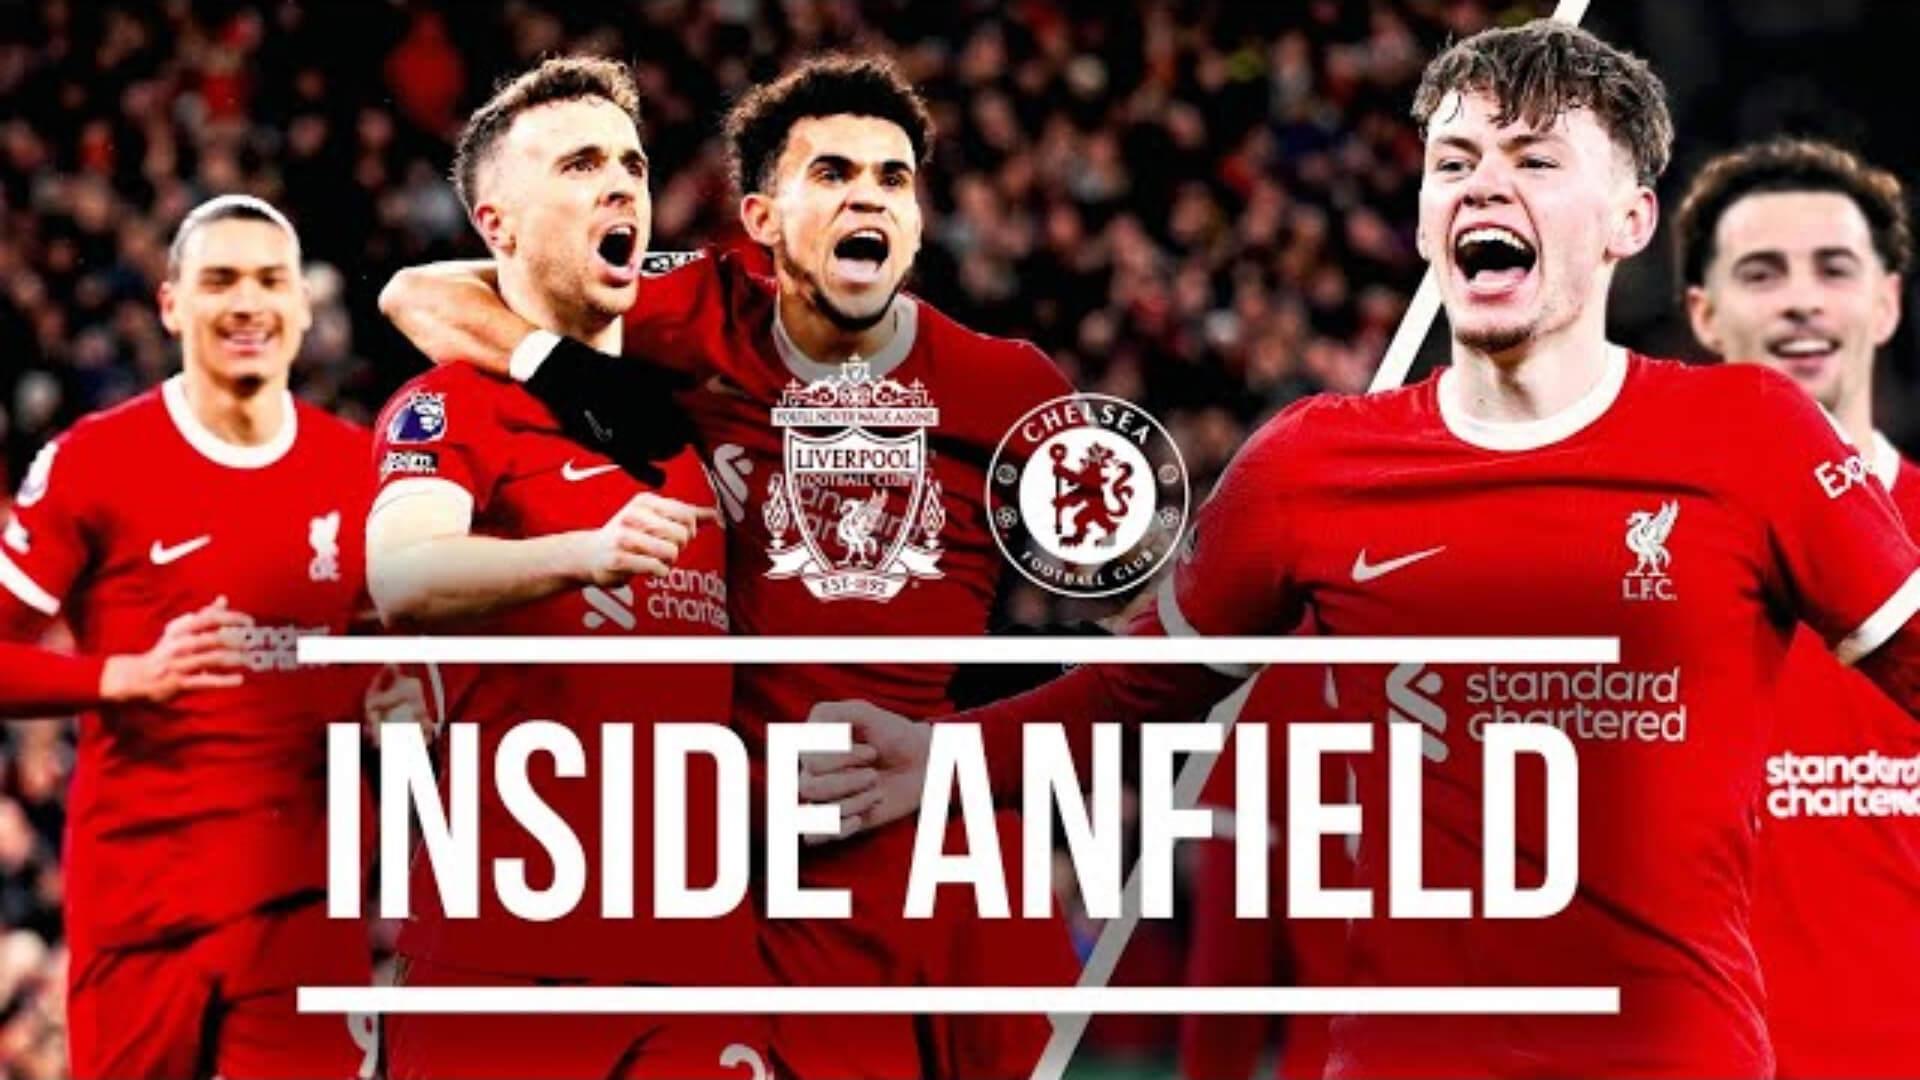 Inside Anfield, Five Boss Goals, Cup Win & Best Behind-The-Scenes